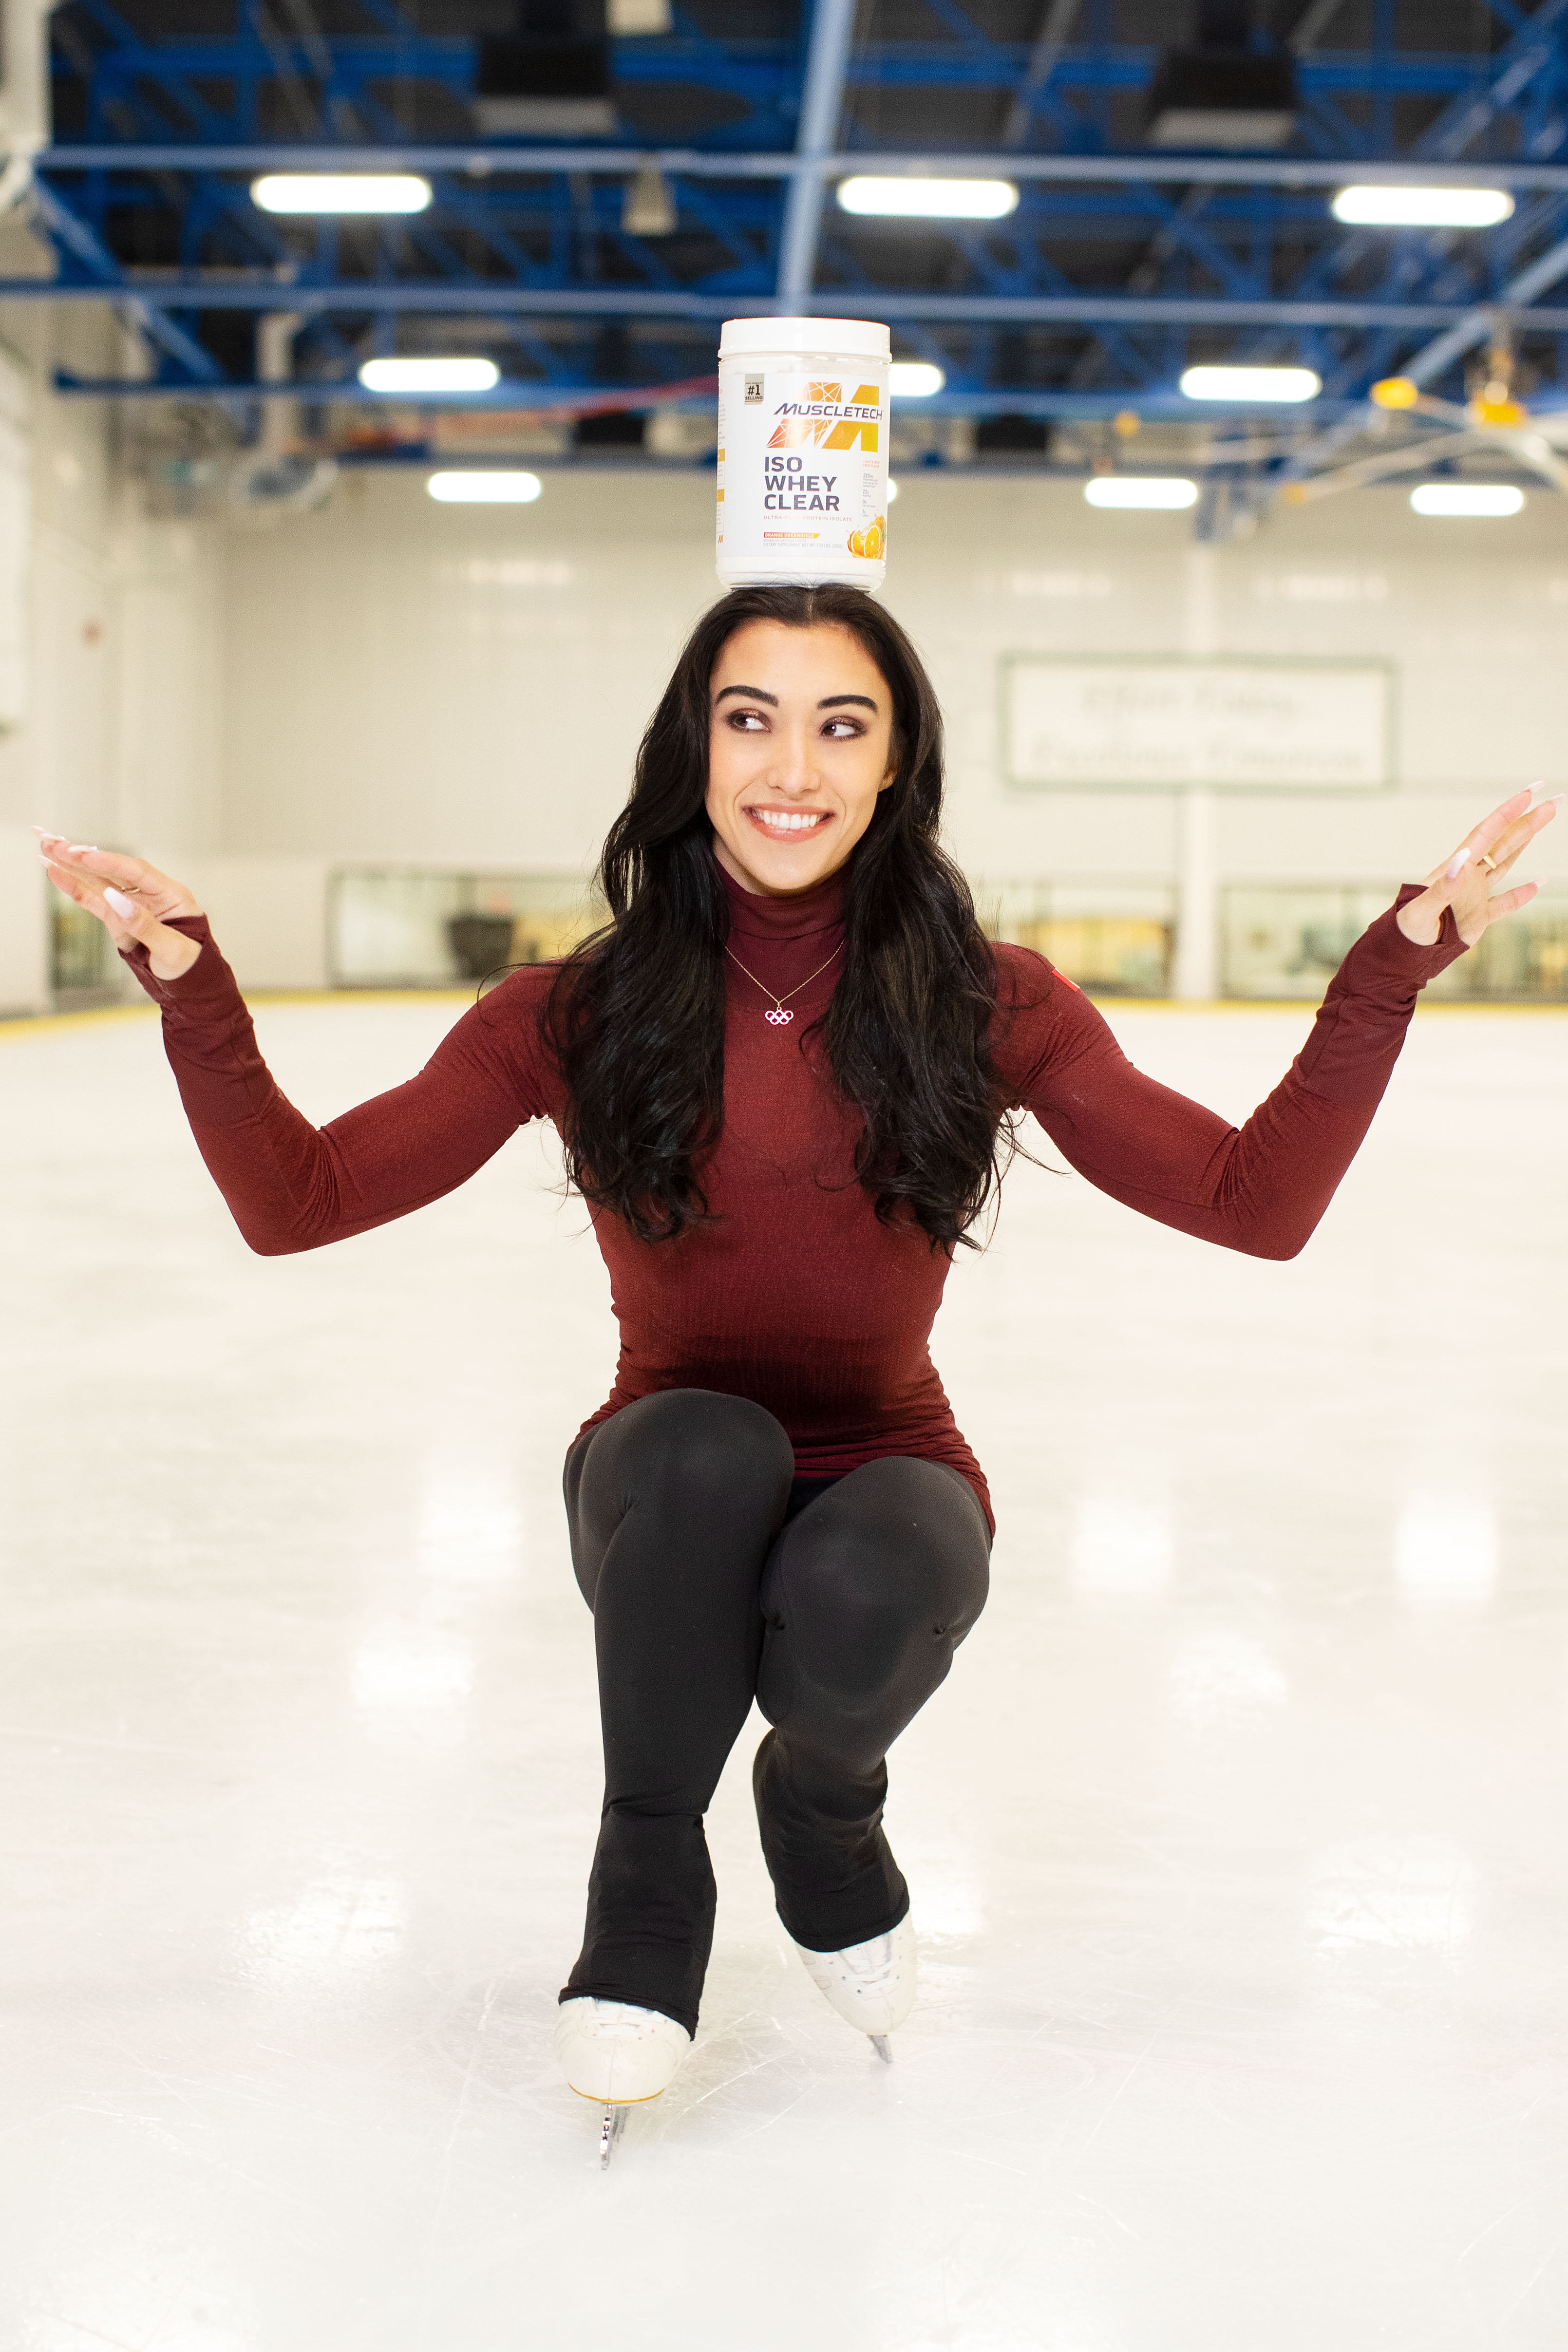 Gold Medalist & Two-Time Canadian National Champion Gabrielle Daleman Joins Team MuscleTech®